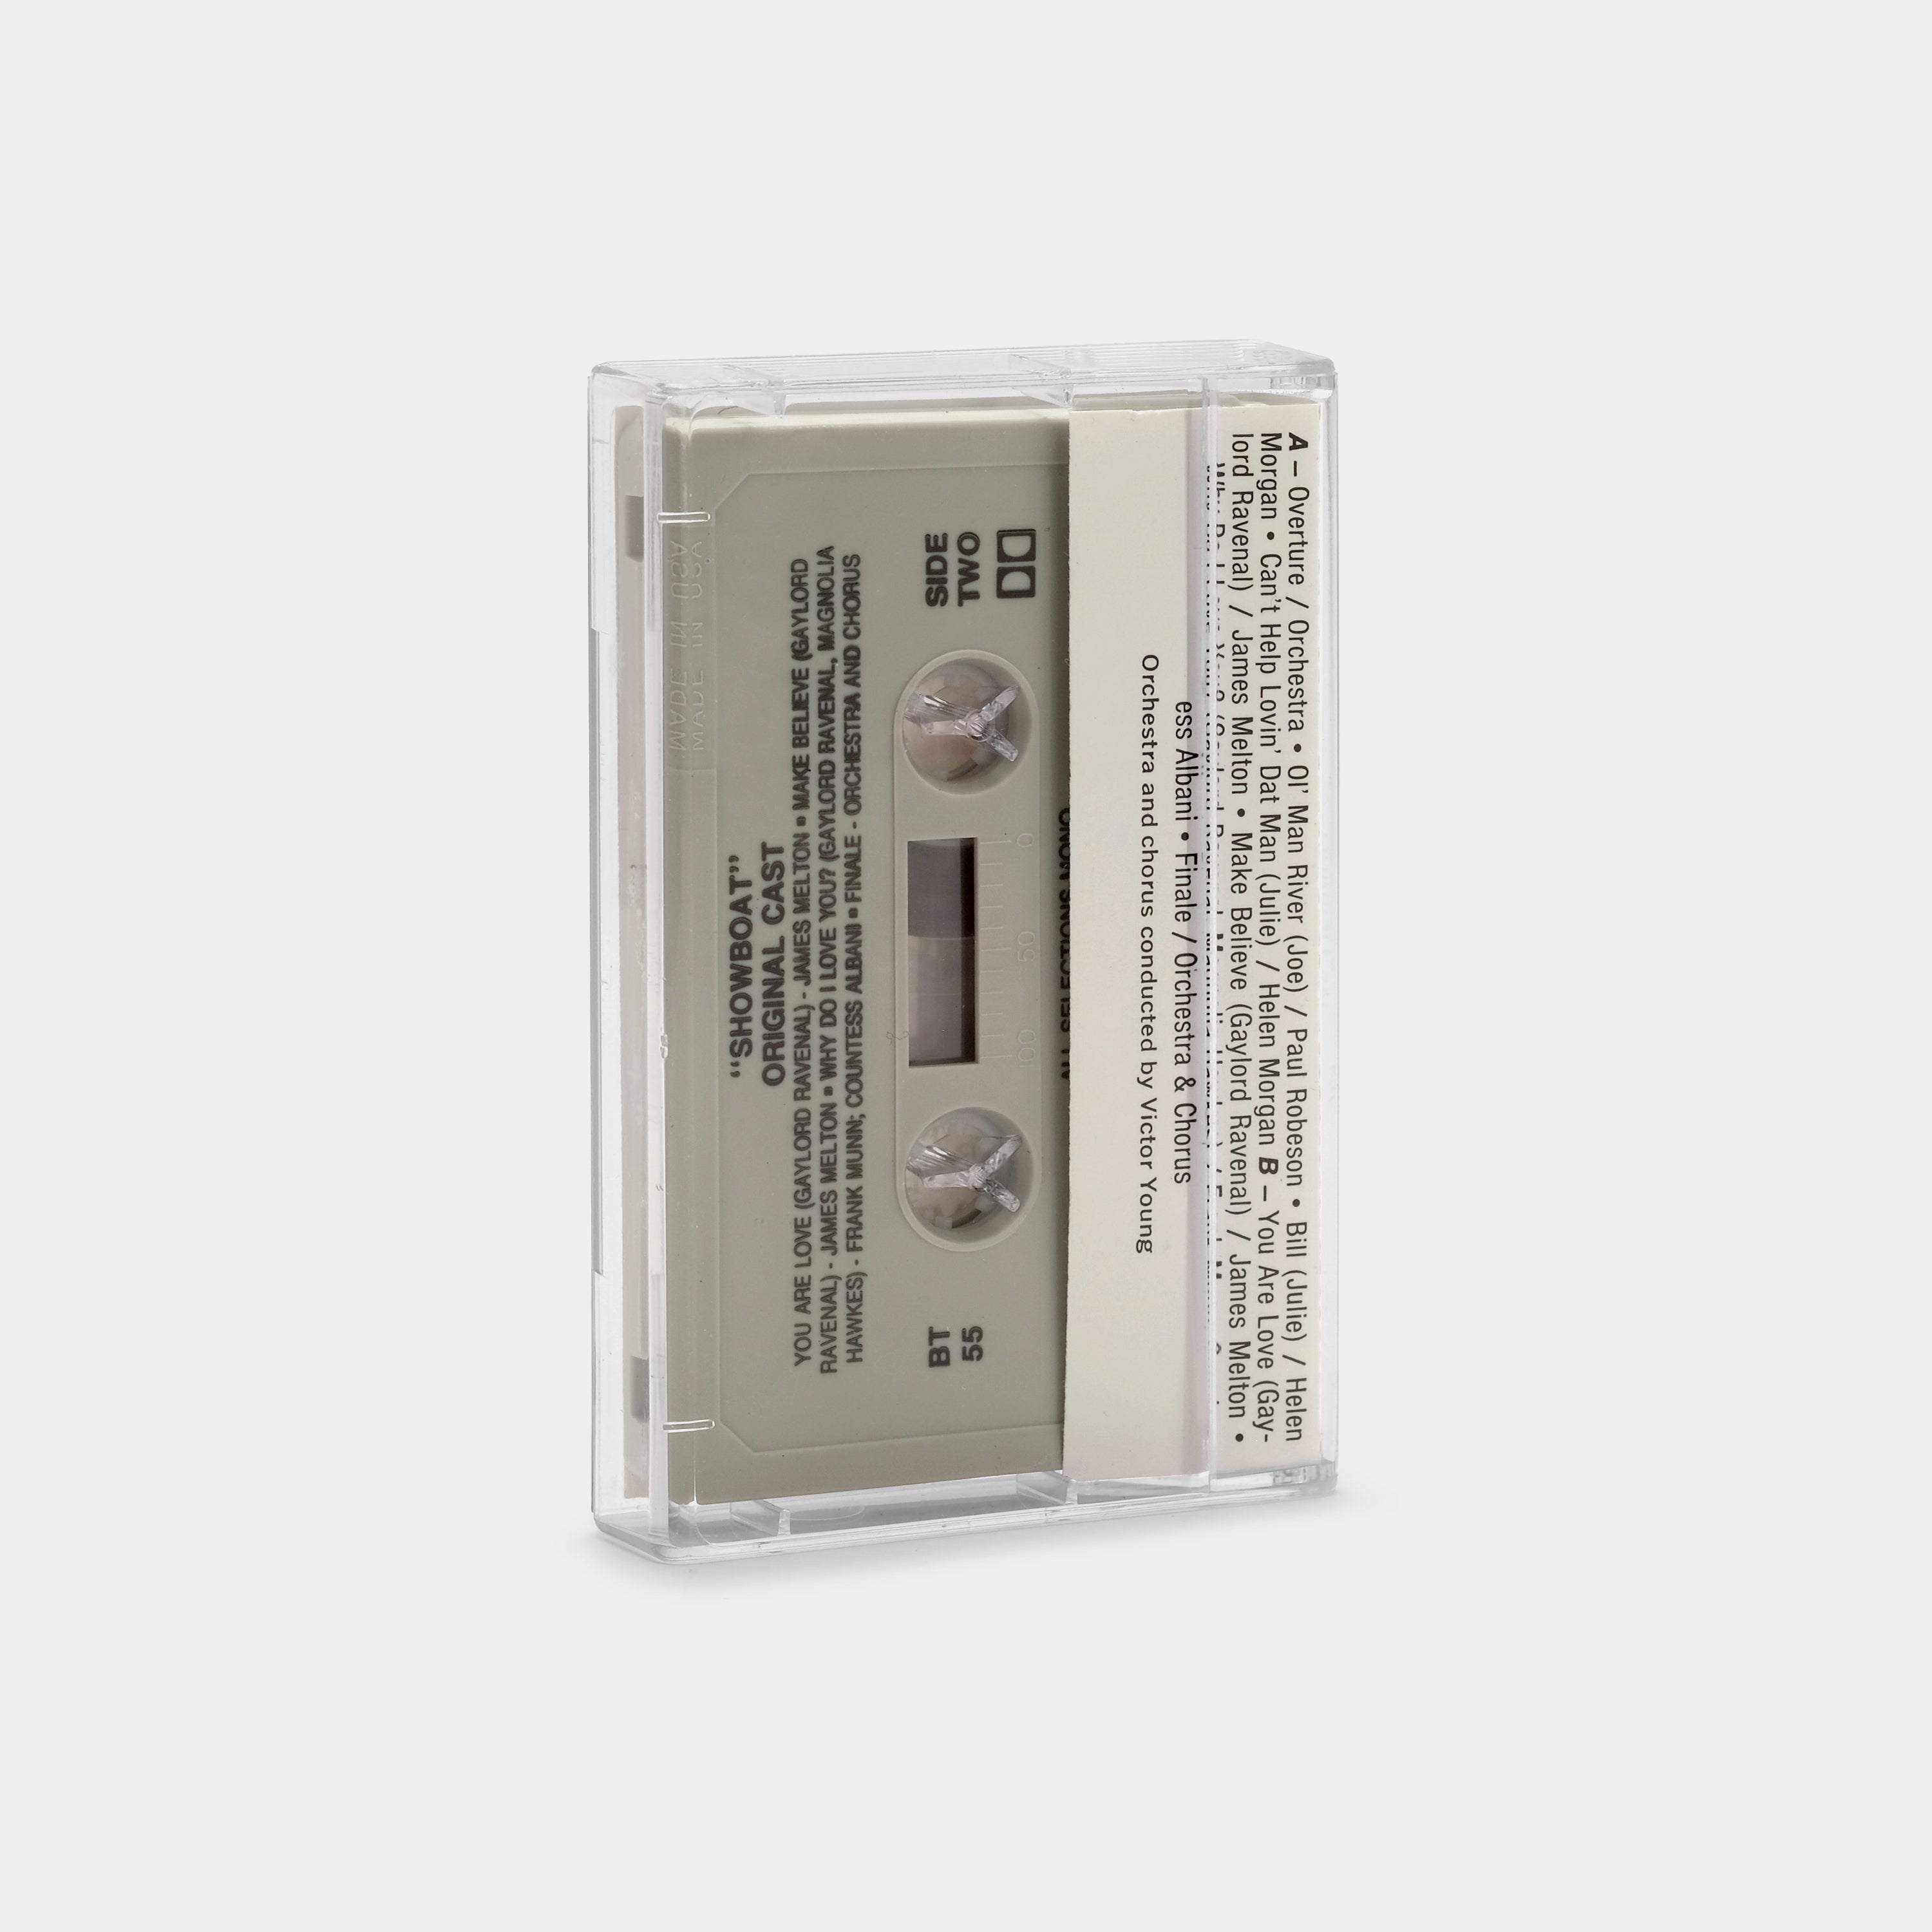 Here Comes The Showboat Cassette Tape